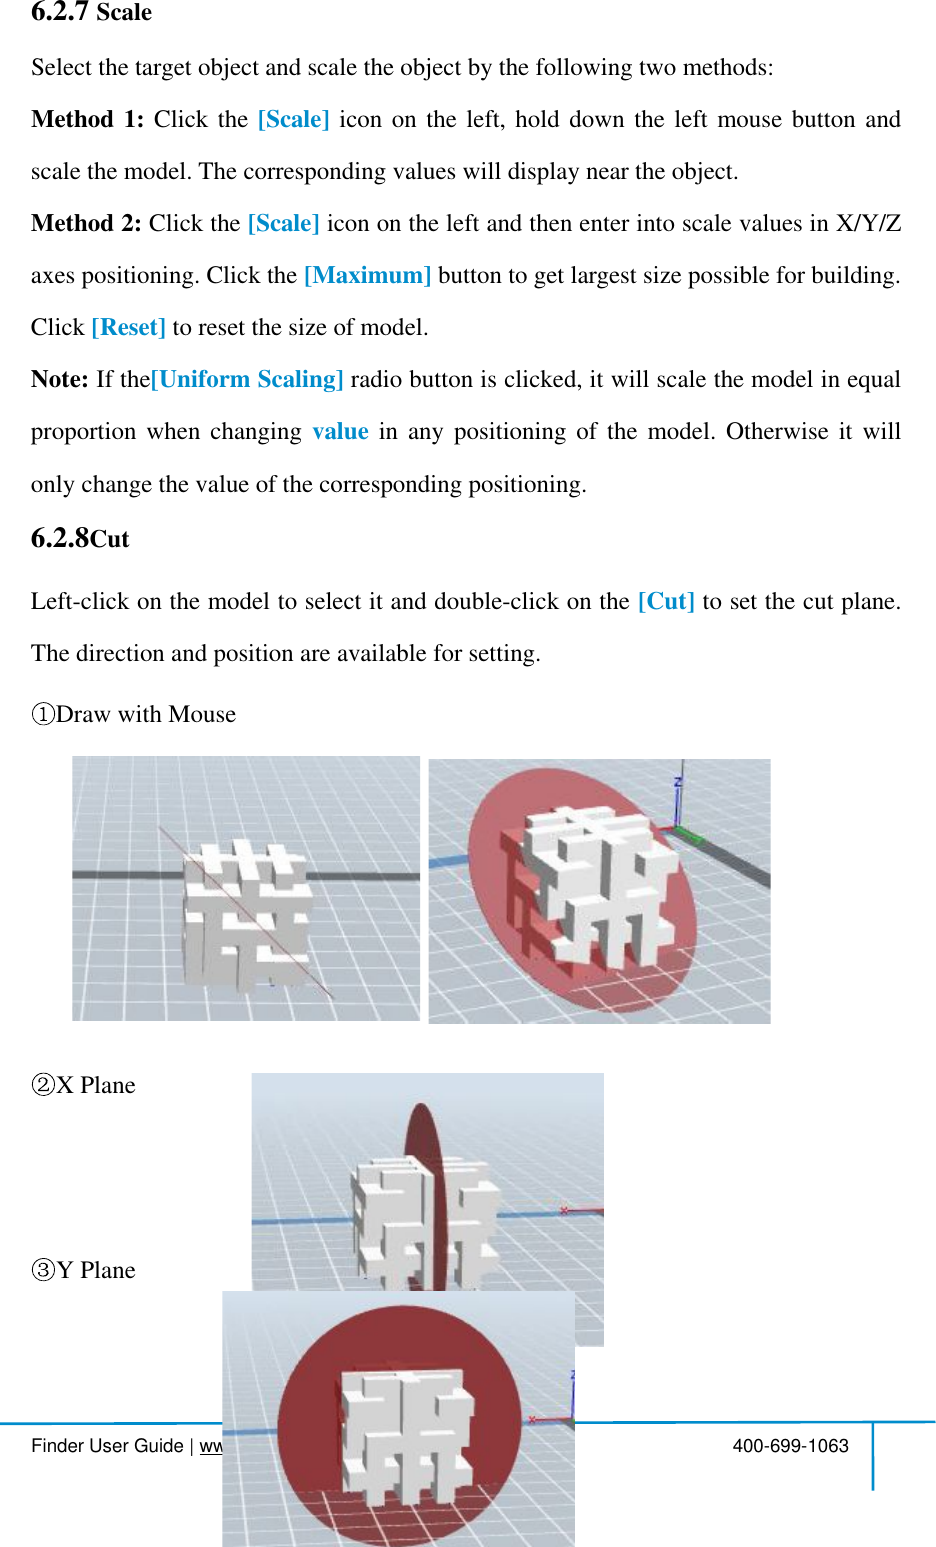  Finder User Guide|www.flashforge.com 400-699-1063436.2.7 ScaleSelectthetarget object and scaletheobject bythefollowingtwomethods:Method1: Clickthe [Scale] iconontheleft,holddowntheleftmousebuttonandscalethemodel.The correspondingvalueswilldisplaynearthe object.Method2: Clickthe [Scale] iconontheleftandthenenterintoscalevaluesinX/Y/Zaxes positioning.Clickthe [Maximum] buttonto getlargest size possiblefor building.Click [Reset] toresetthe size ofmodel.Note: Ifthe[UniformScaling] radiobuttonisclicked,itwillscalethemodelinequalproportionwhenchanging value inanypositioningofthemodel.Otherwiseitwillonly changethe value ofthe corresponding positioning.6.2.8CutLeft-clickonthemodeltoselectitanddouble-clickonthe [Cut] tosetthecutplane.The direction and position are availablefor setting.Drawwith MouseX PlaneY Plane